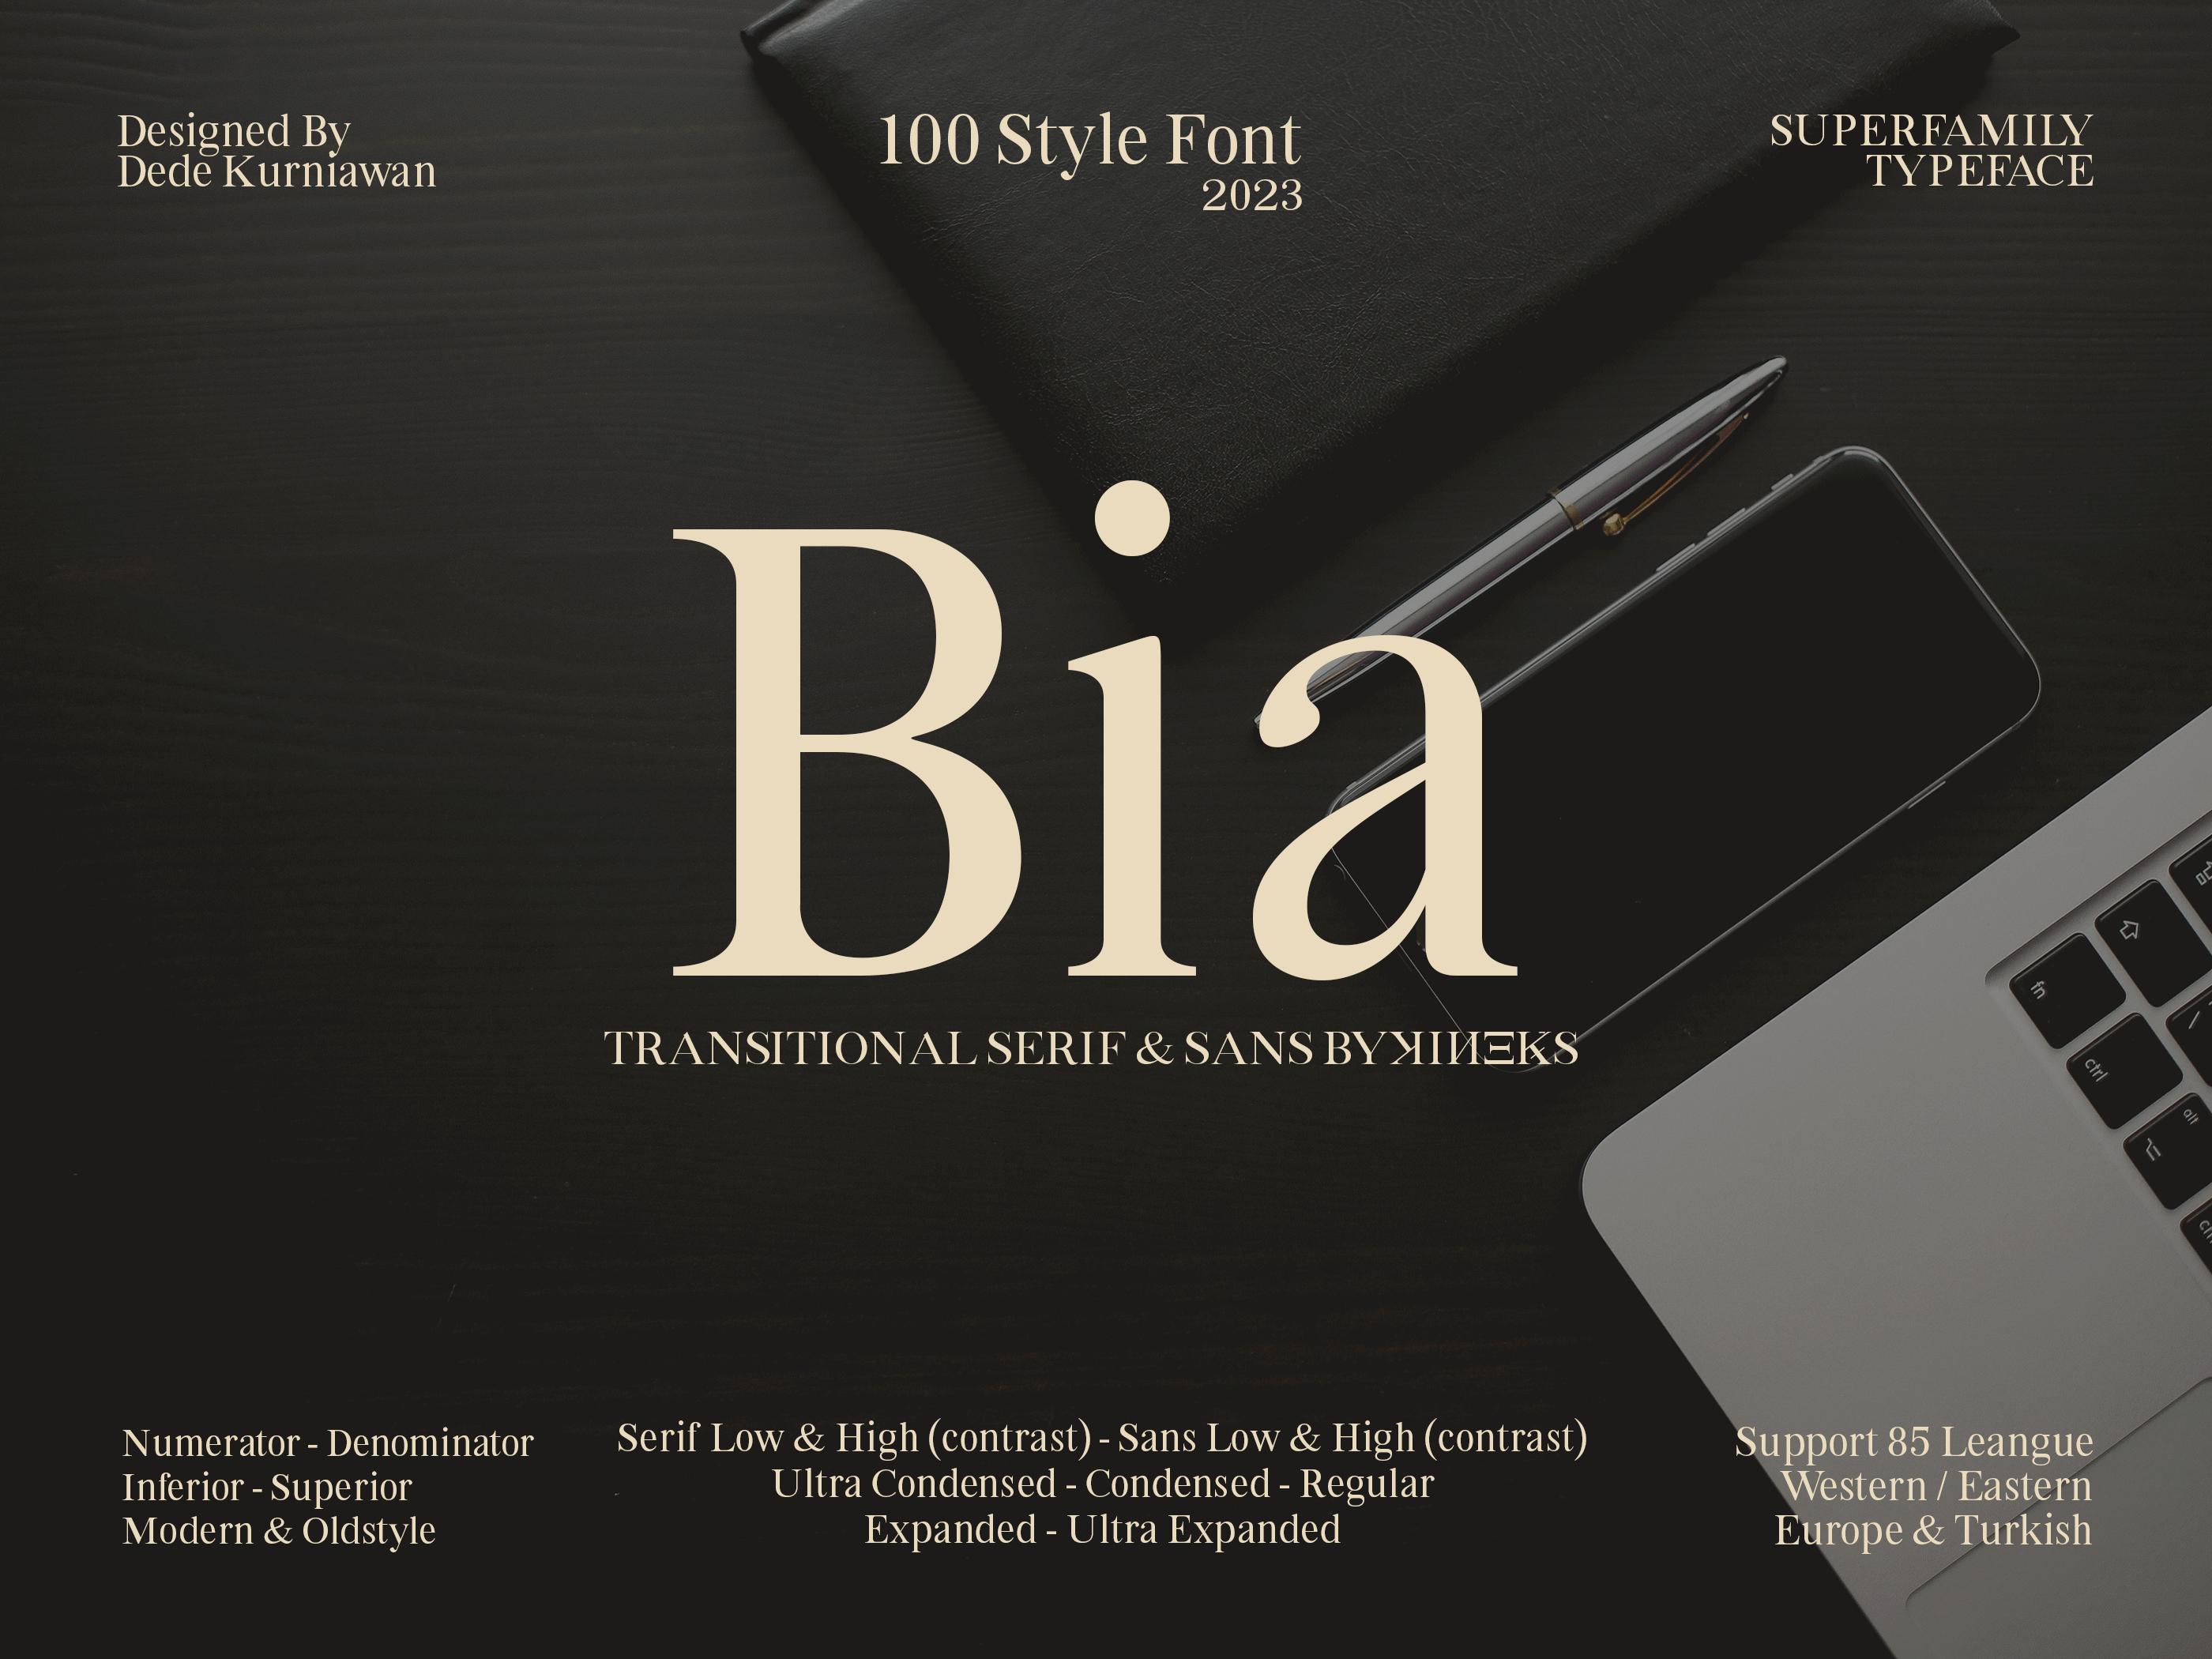 Bia | Transitional Serif & Sans Typeface chemistry font cover book font display font font family high contrast font hotel font jewelry font low contrast font newspaper font office font perfume font skincare font superfamily font text font transitional serif font typeface ultra condensed font ultra expanded font web font wedding font